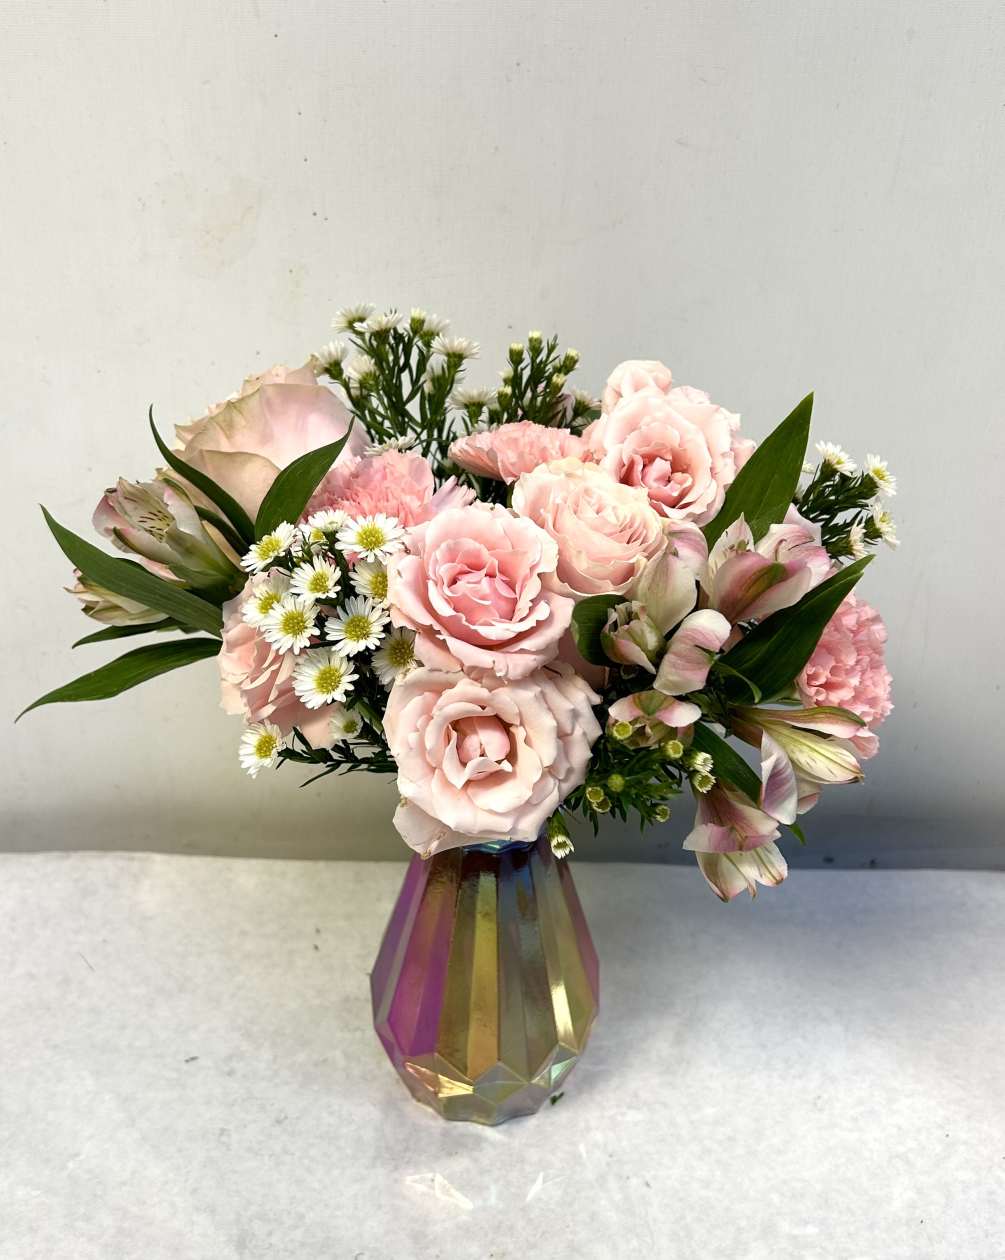 Feminine and dainty all pinks in an irredescent pink vase. The perfect